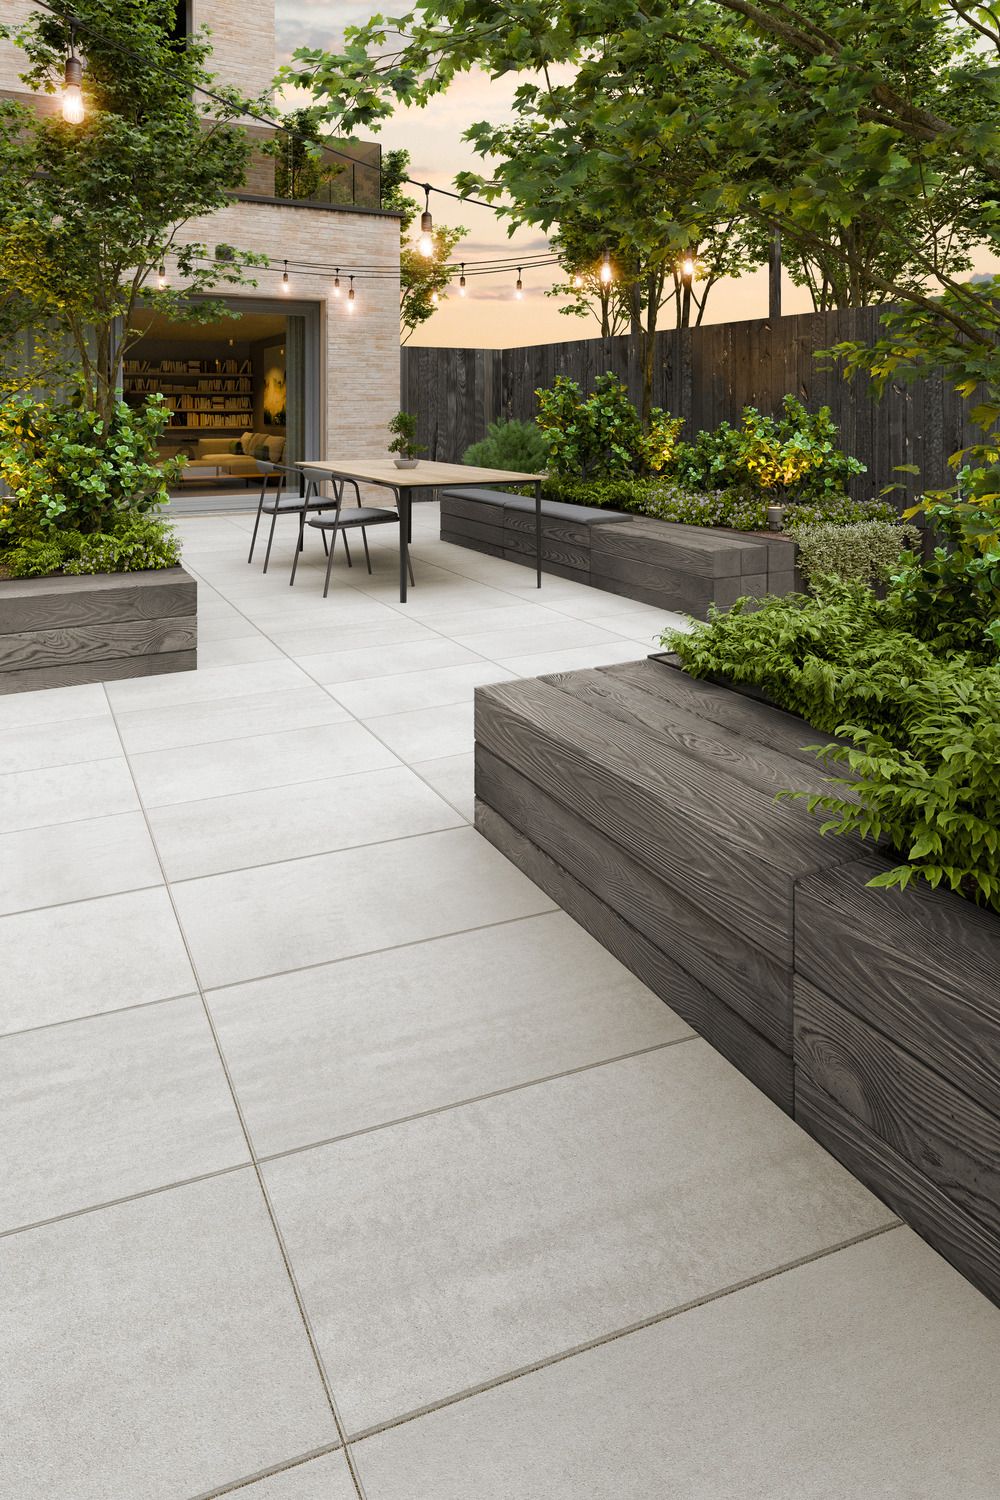 The Benefits of Installing a Concrete
Patio in Your Outdoor Space